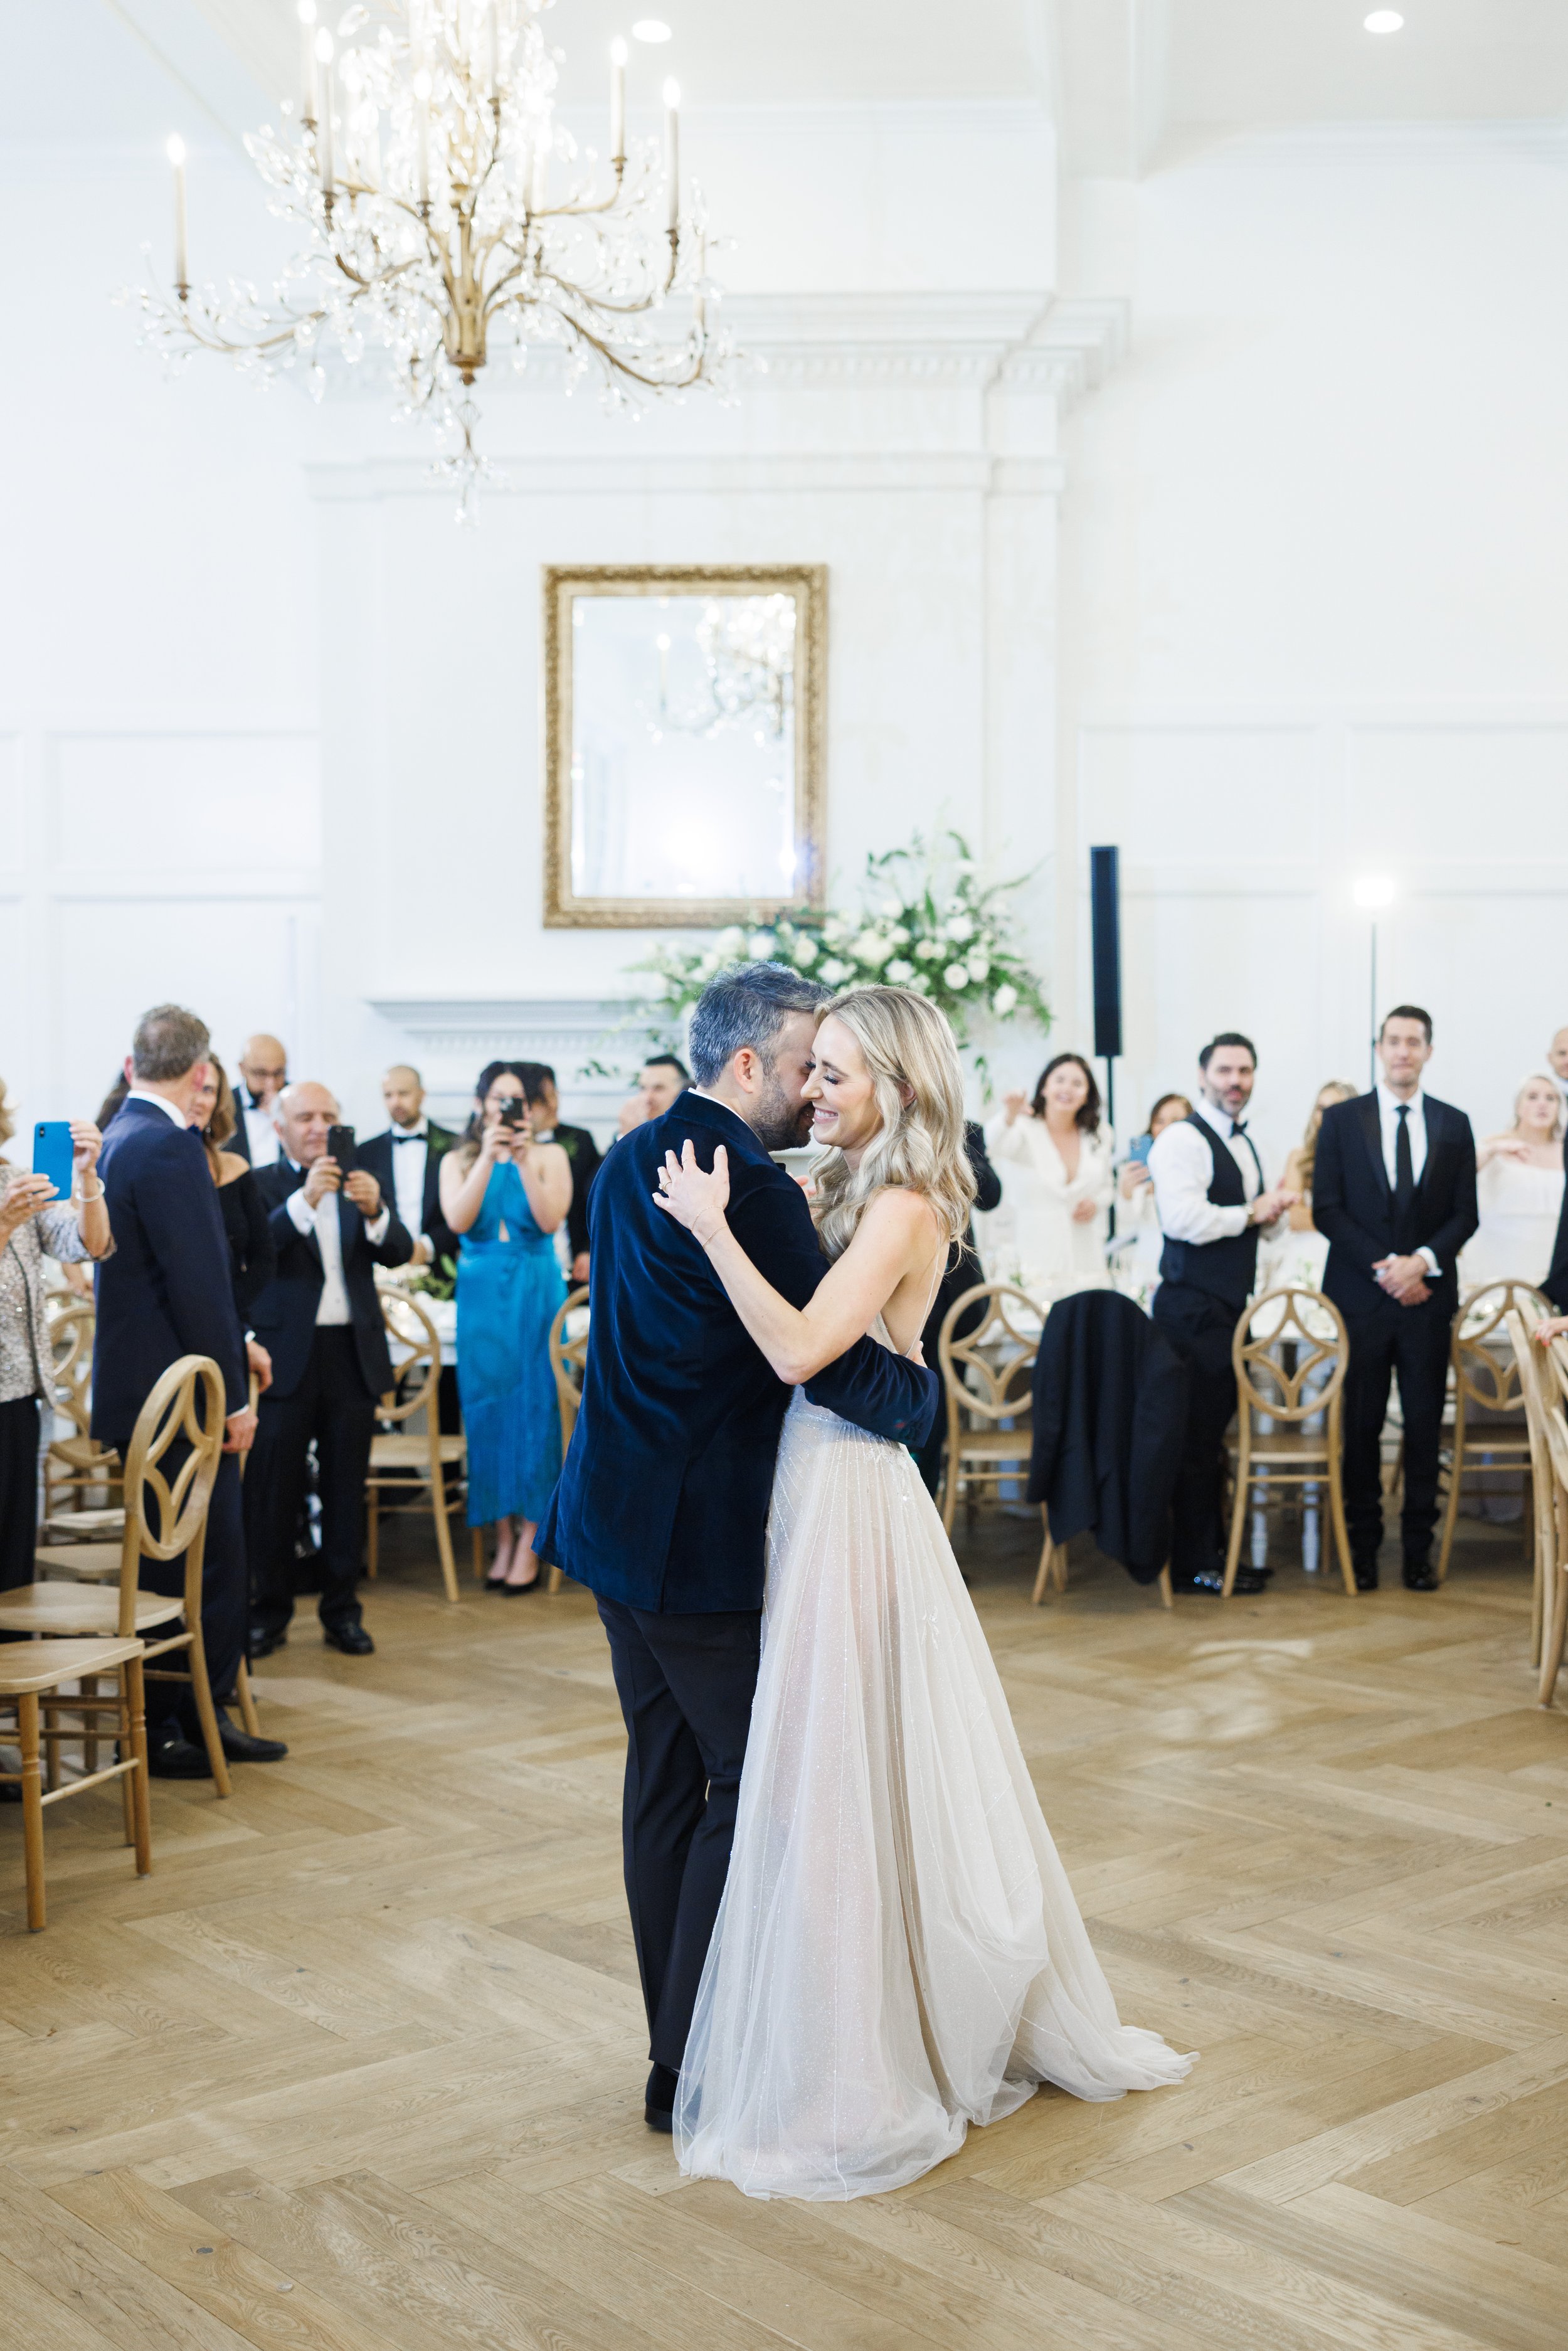  High-end wedding photographer captures a couple’s first dance as newlyweds by Savanna Richardson Photography. first dance #SavannaRichardsonPhotography #SavannaRichardsonWeddings #NYEwedding #magicalwedding #snowywedding #holidaywedding #married 